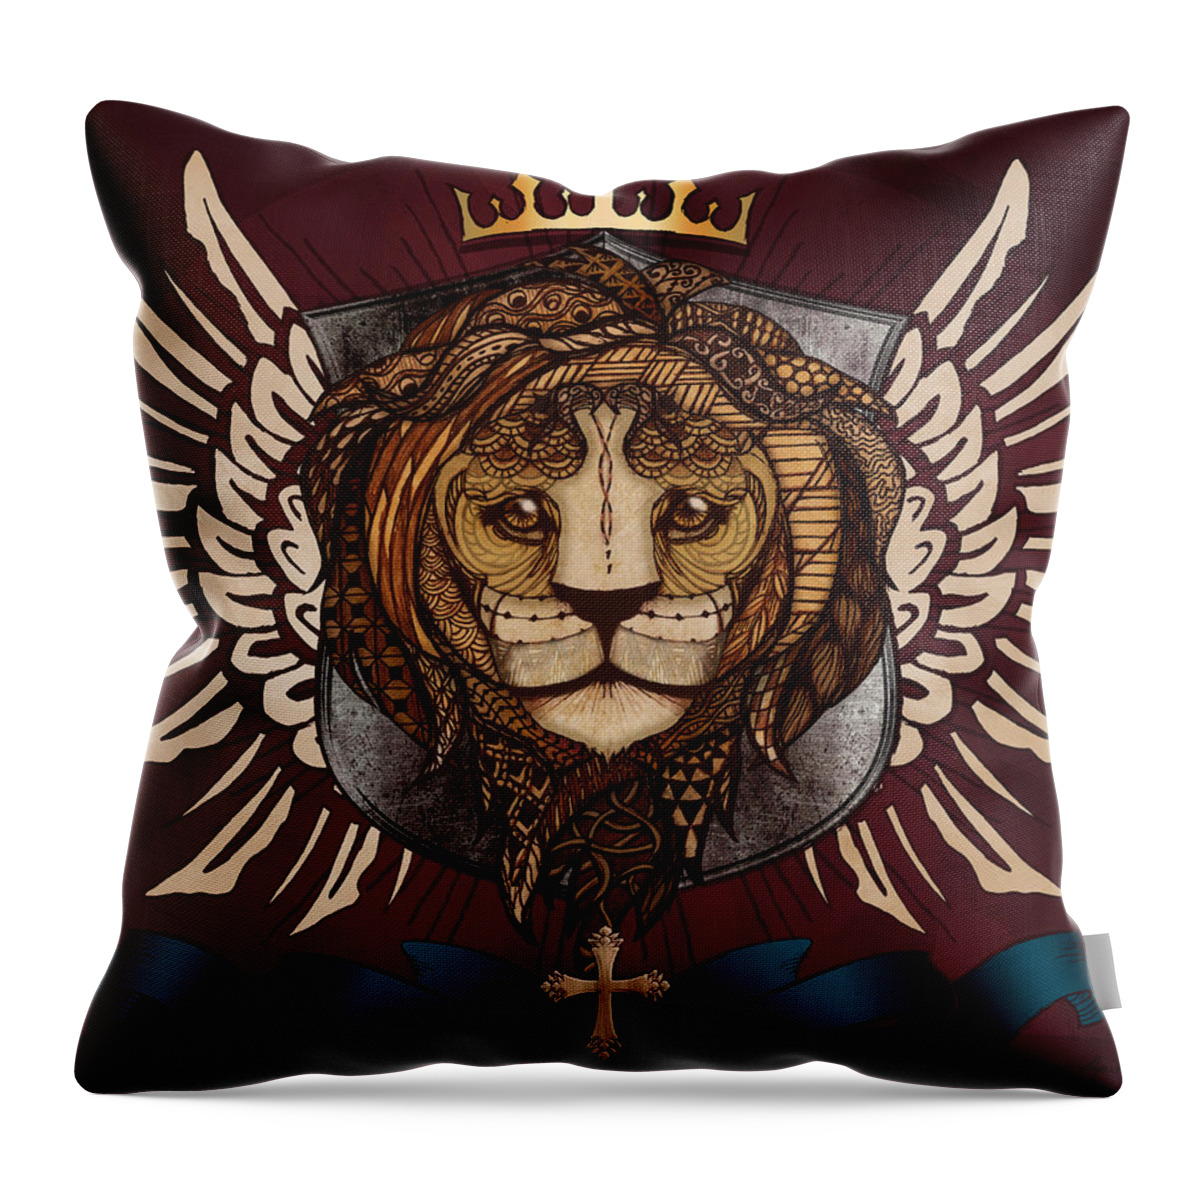 King Throw Pillow featuring the digital art The King's Heraldry by April Moen